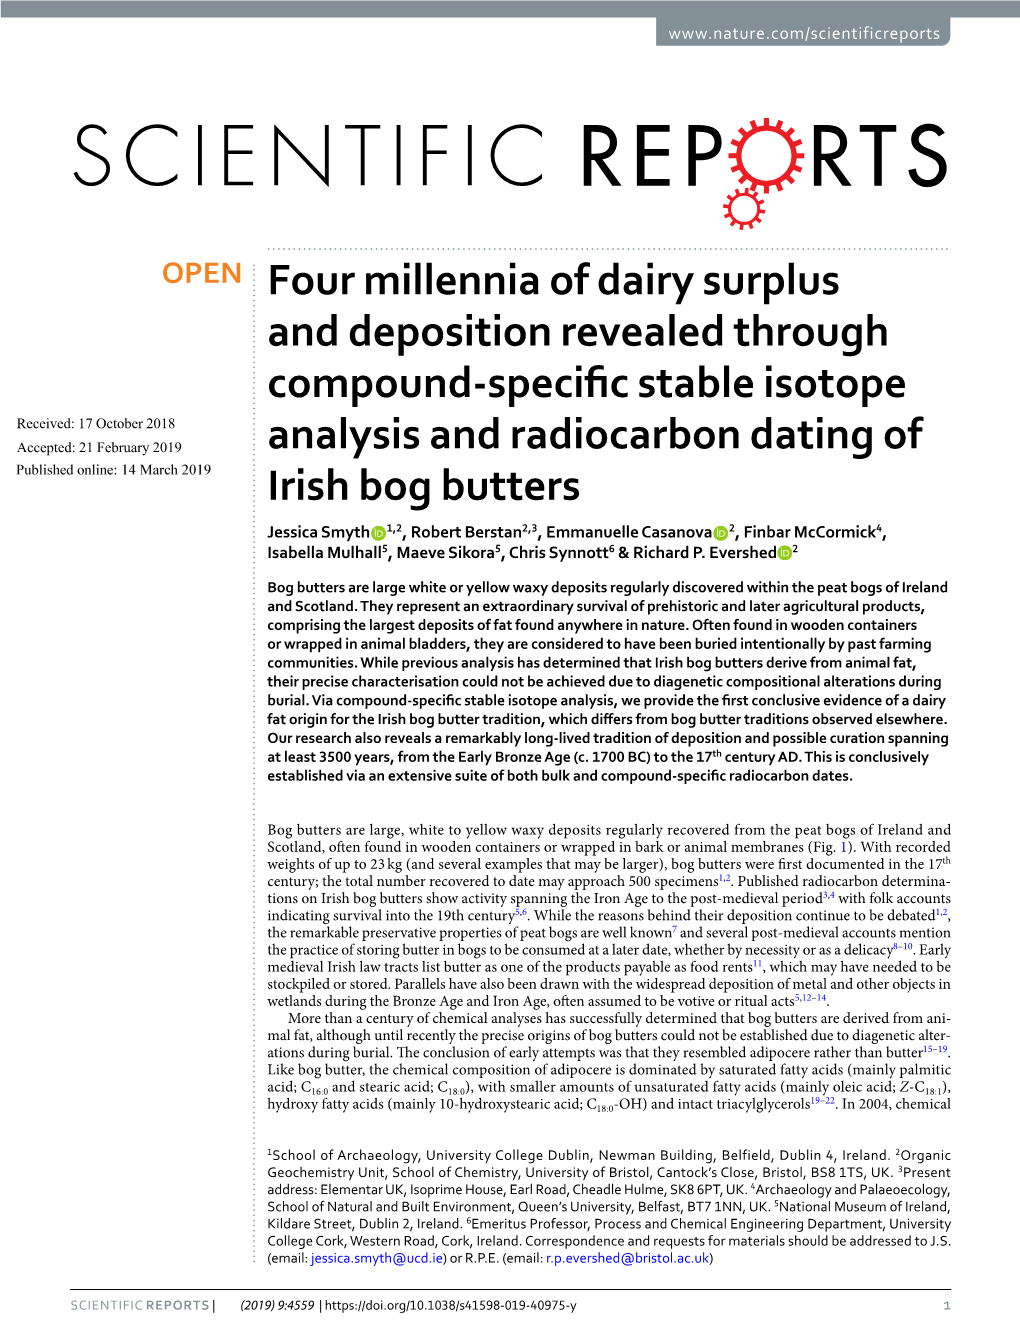 Four Millennia of Dairy Surplus and Deposition Revealed Through